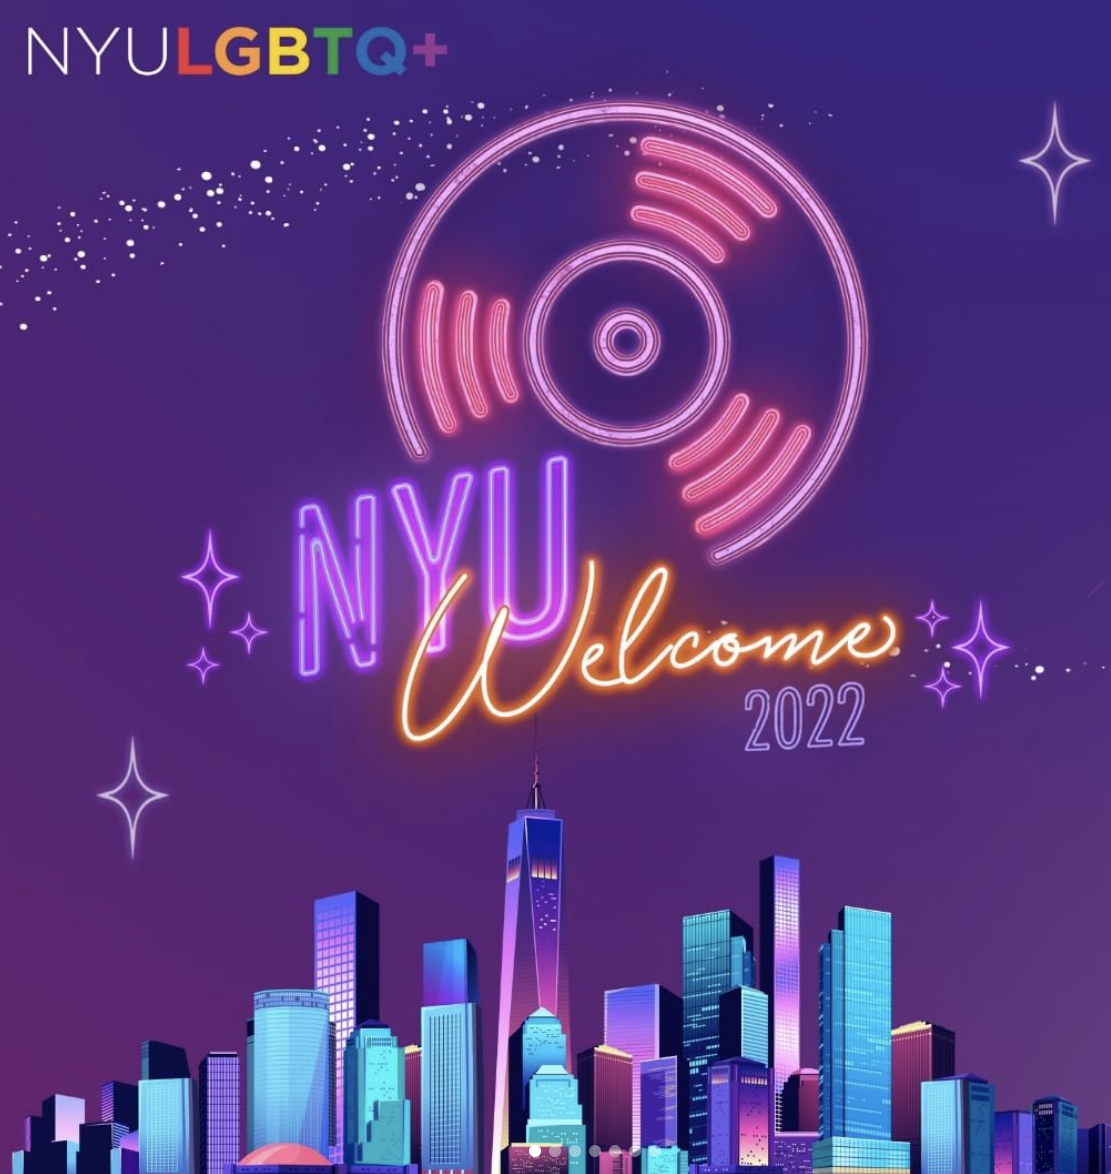 Social media image for NYU Welcome 2022 hosted by NYU LGBTQ+